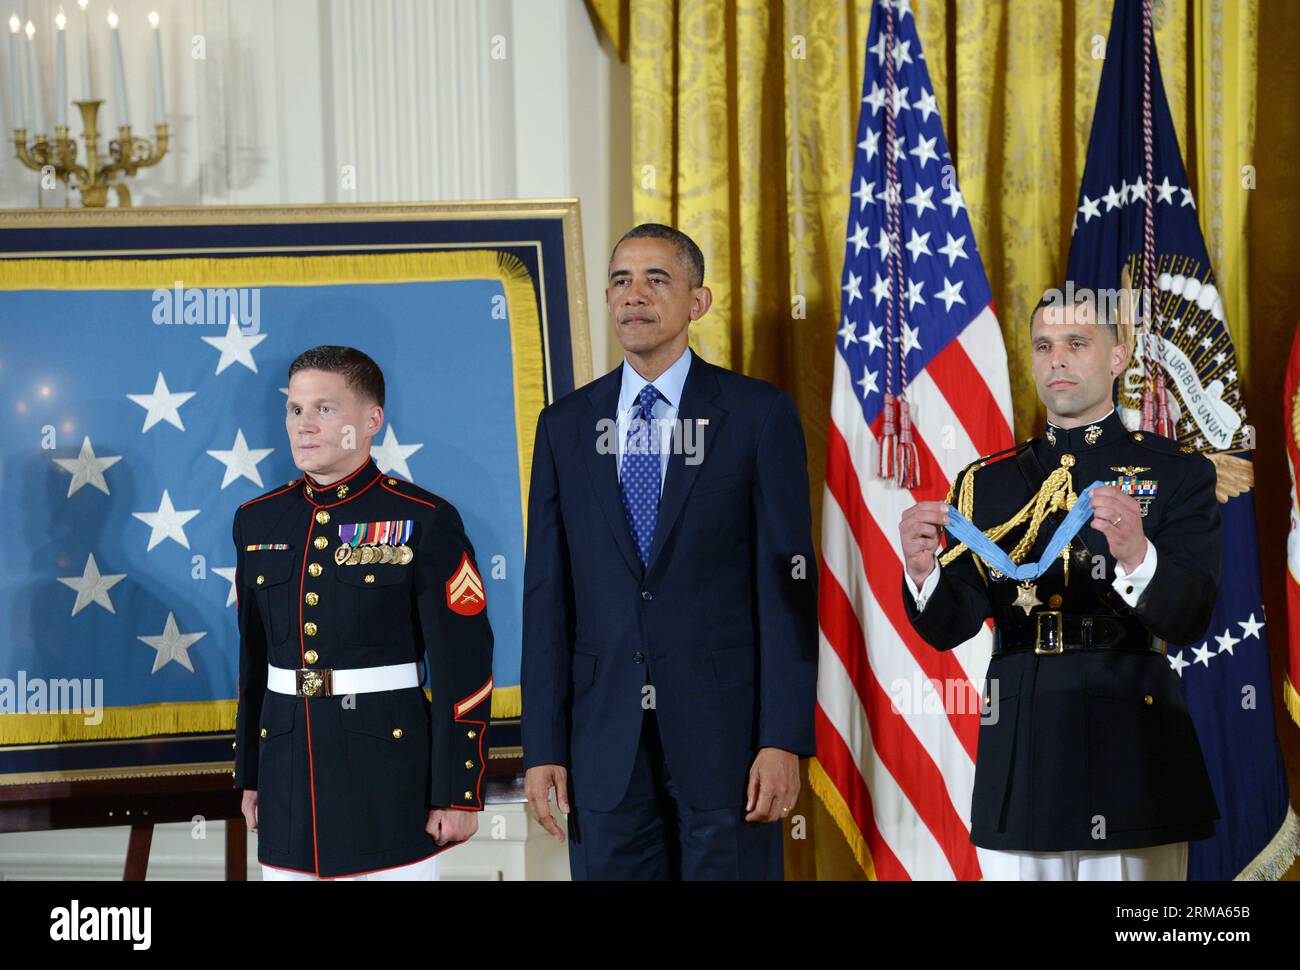 (140619) -- WASHINGTON D.C., June 19, 2014 (Xinhua) -- U.S. President Barack Obama (C) stands at a ceremony for awarding William Kyle Carpenter (L) with the Medal of Honor in the East Room of the White House in Washington D.C., the United States, on June 19, 2014. Carpenter received the medal for covering a grenade to save fellow Marines during a Taliban attack in November 2010. Carpenter is the eighth living recipient chosen for the highest military award. (Xinhua/Yin Bogu) US-WASHINGTON D.C.-MEDAL OF HONOR-CARPENTER PUBLICATIONxNOTxINxCHN   Washington D C June 19 2014 XINHUA U S President Ba Stock Photo